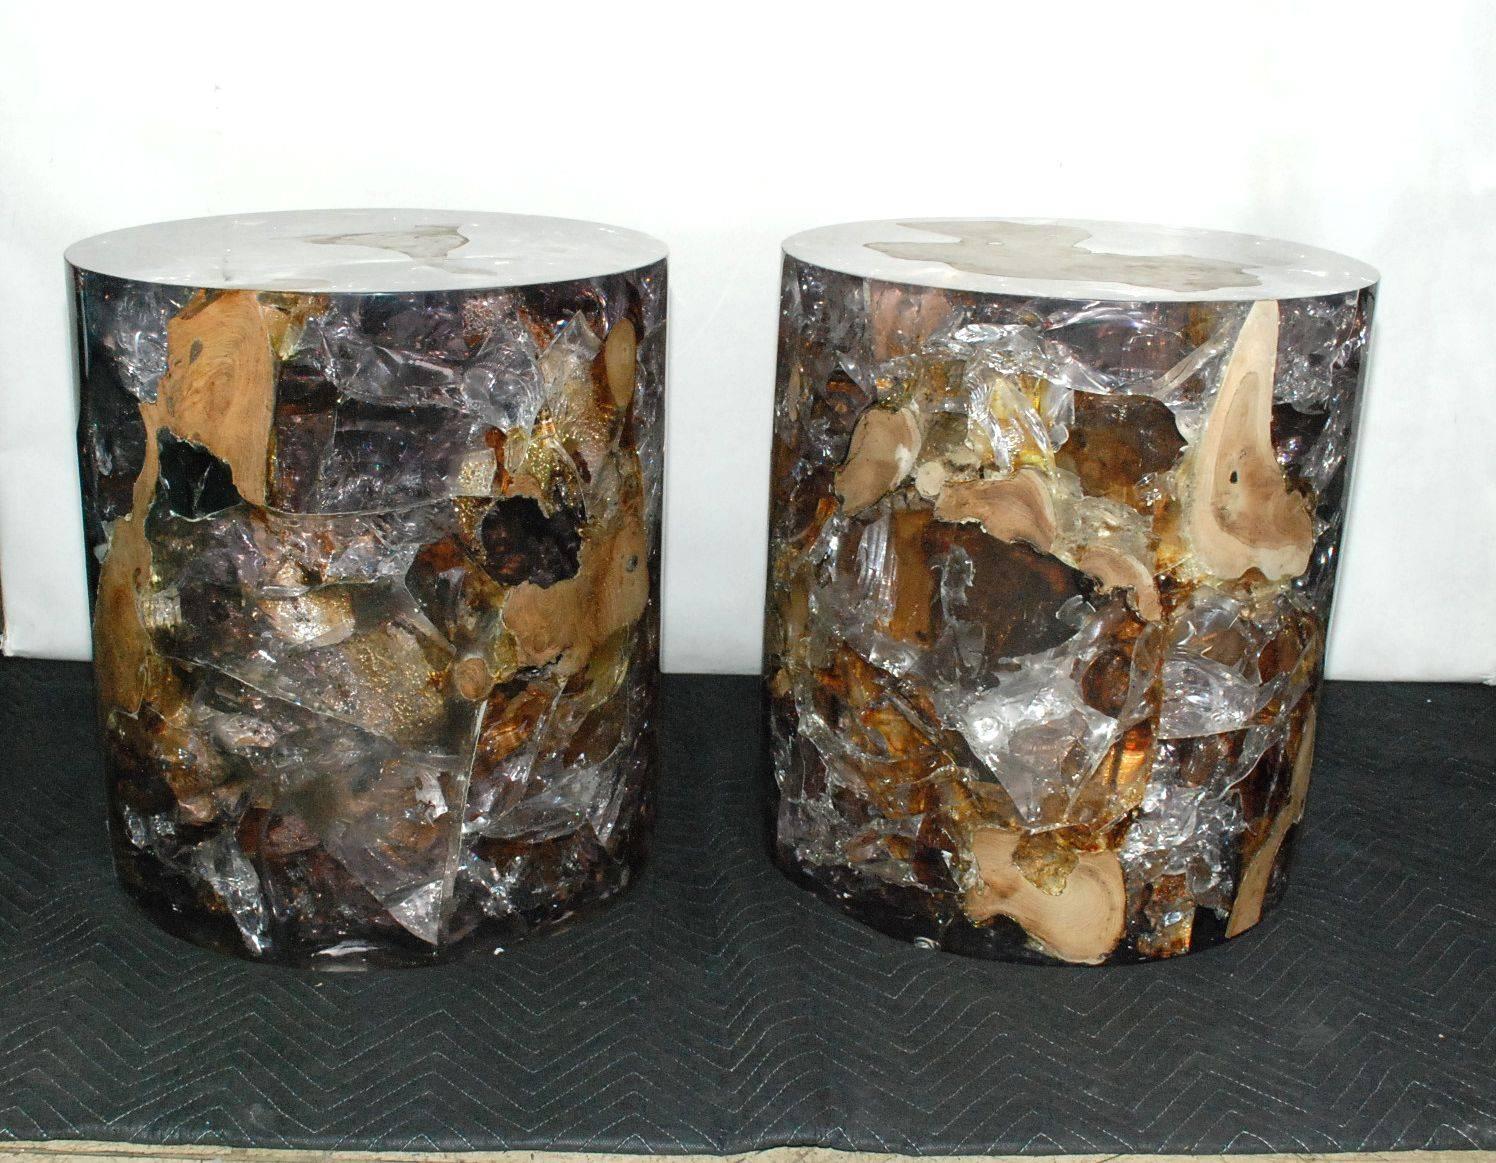 Pair of round side tables made of teak wood and clear resin. Each table is unique.